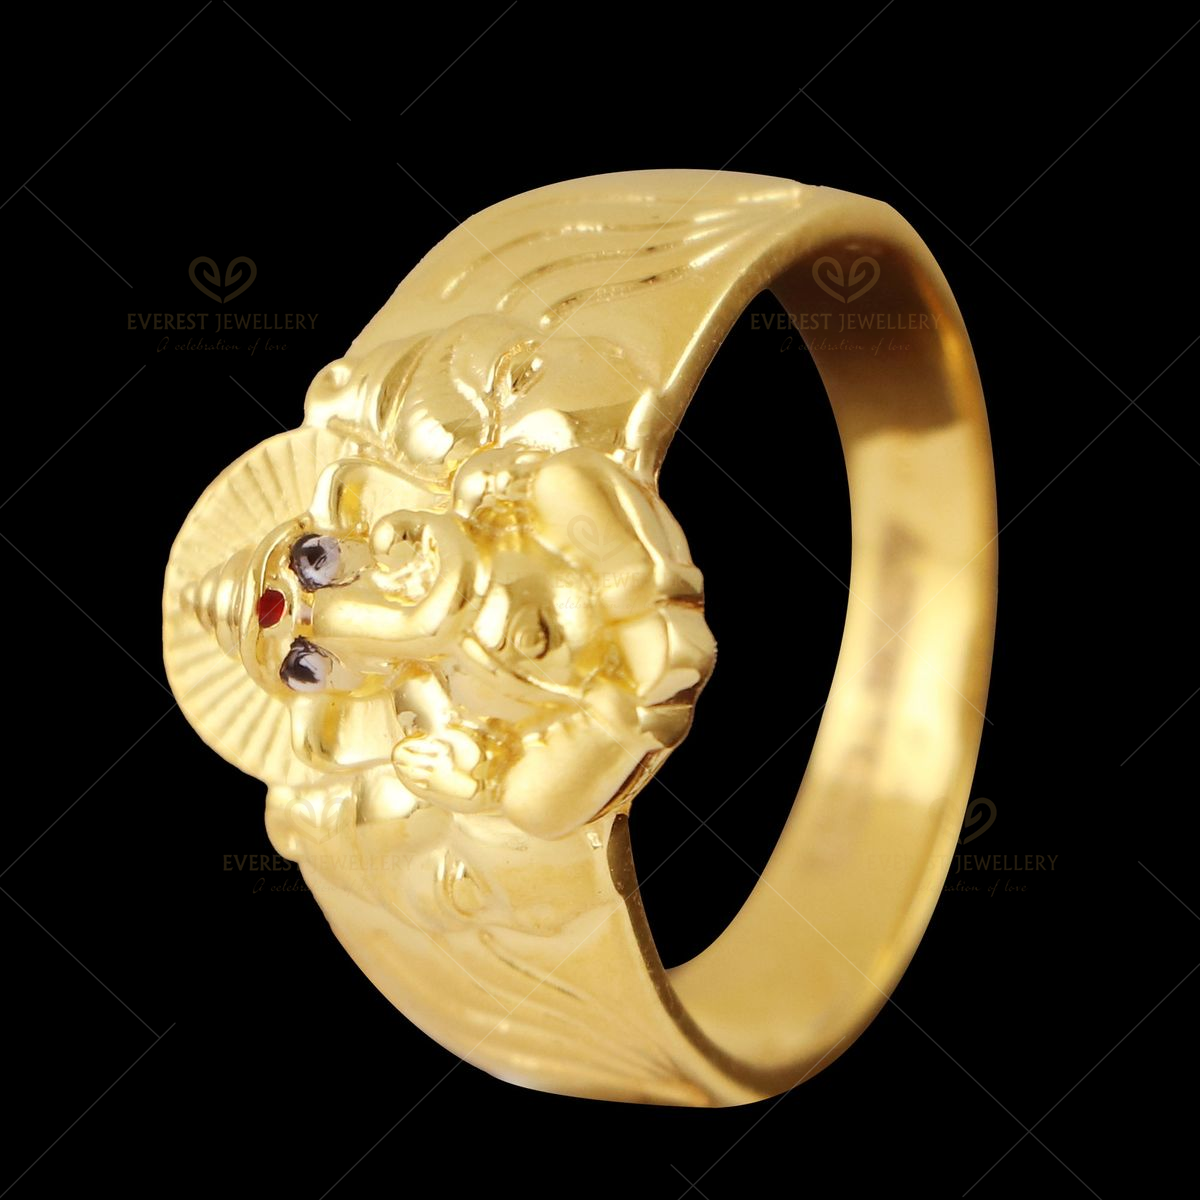 22k Gold ring with Lord Ganesh (Heavy) - RiMr2231 - 22kt gold ring with lord  Ganesh, Solid and Heavy ring in comfort fit for strong men. This exquisite